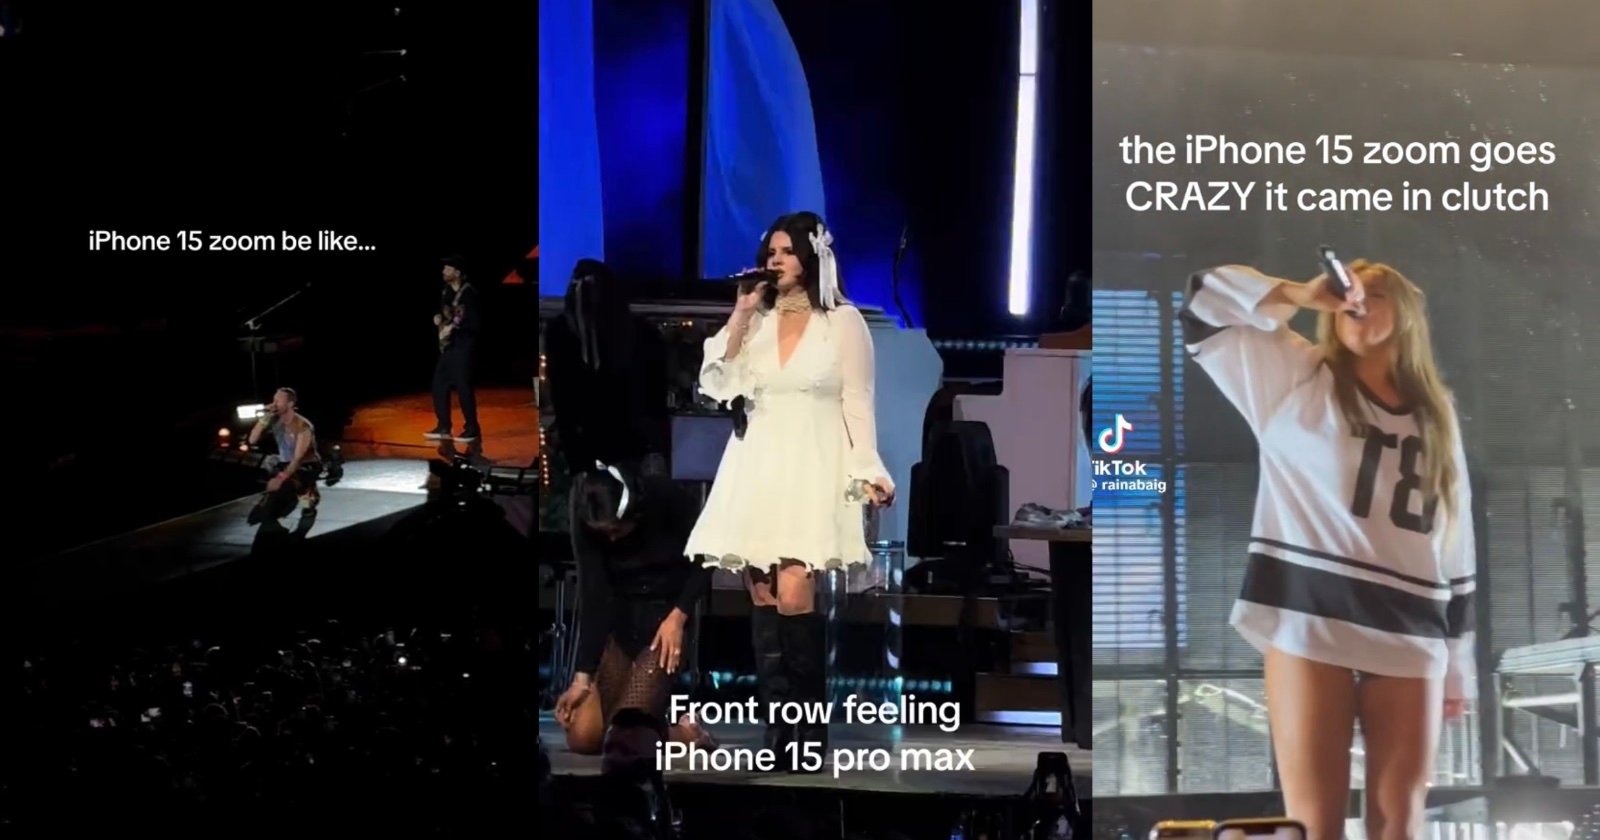 Concertgoers Use iPhone 15 Zoom For Front Row Feeling Amid High Ticket Prices